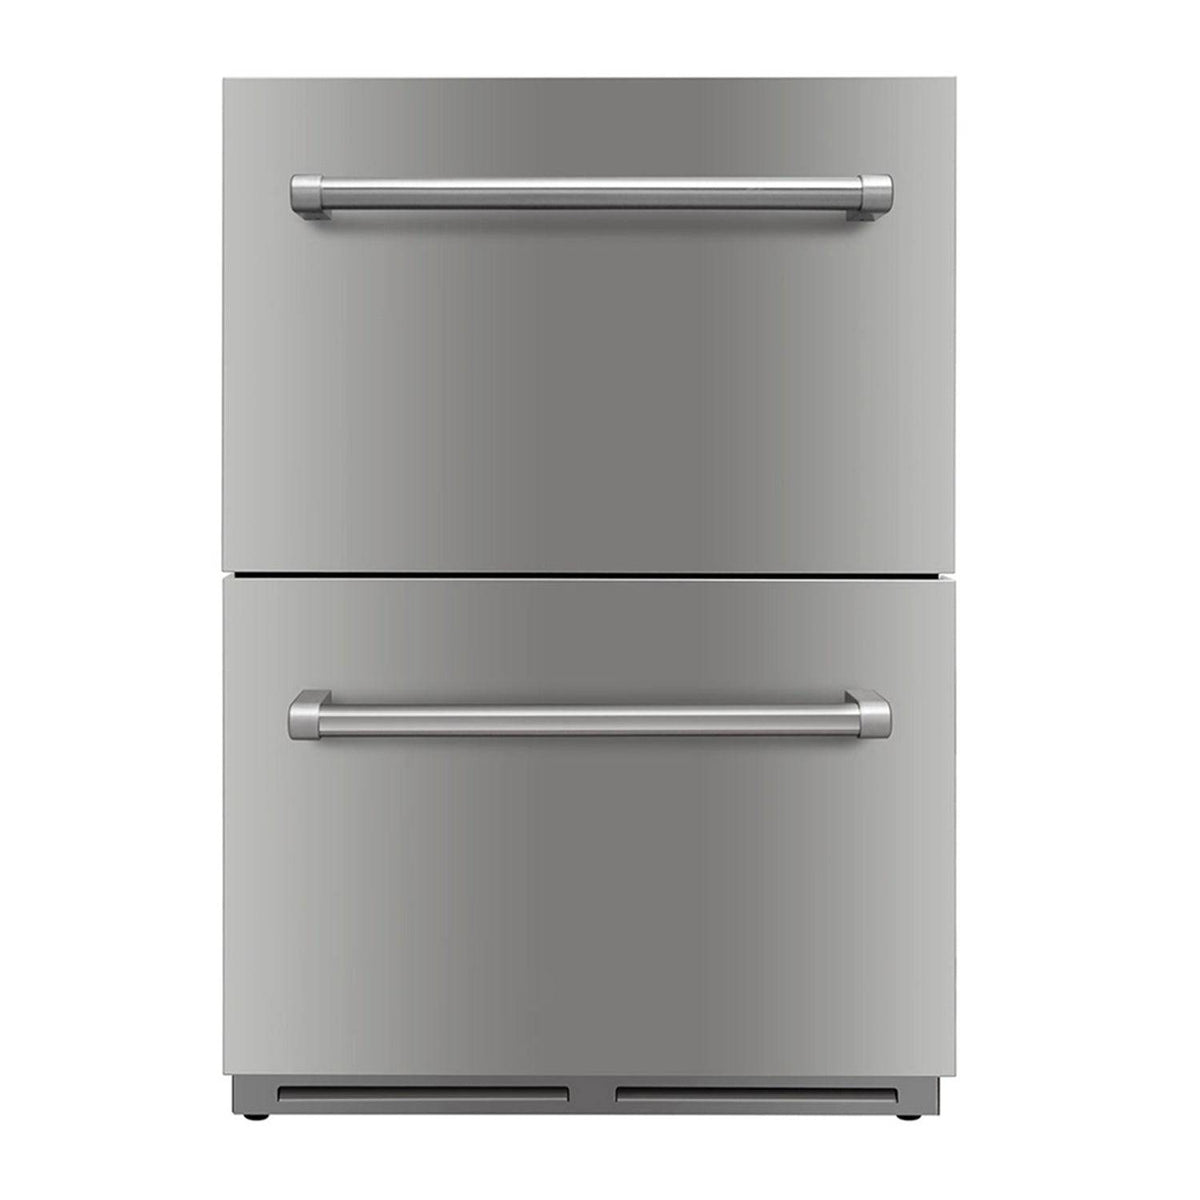 Fobest 24 Inch Stainless Steel Under Counter Refrigerator with 2 Drawers - Refrigerators-Fobest Appliance